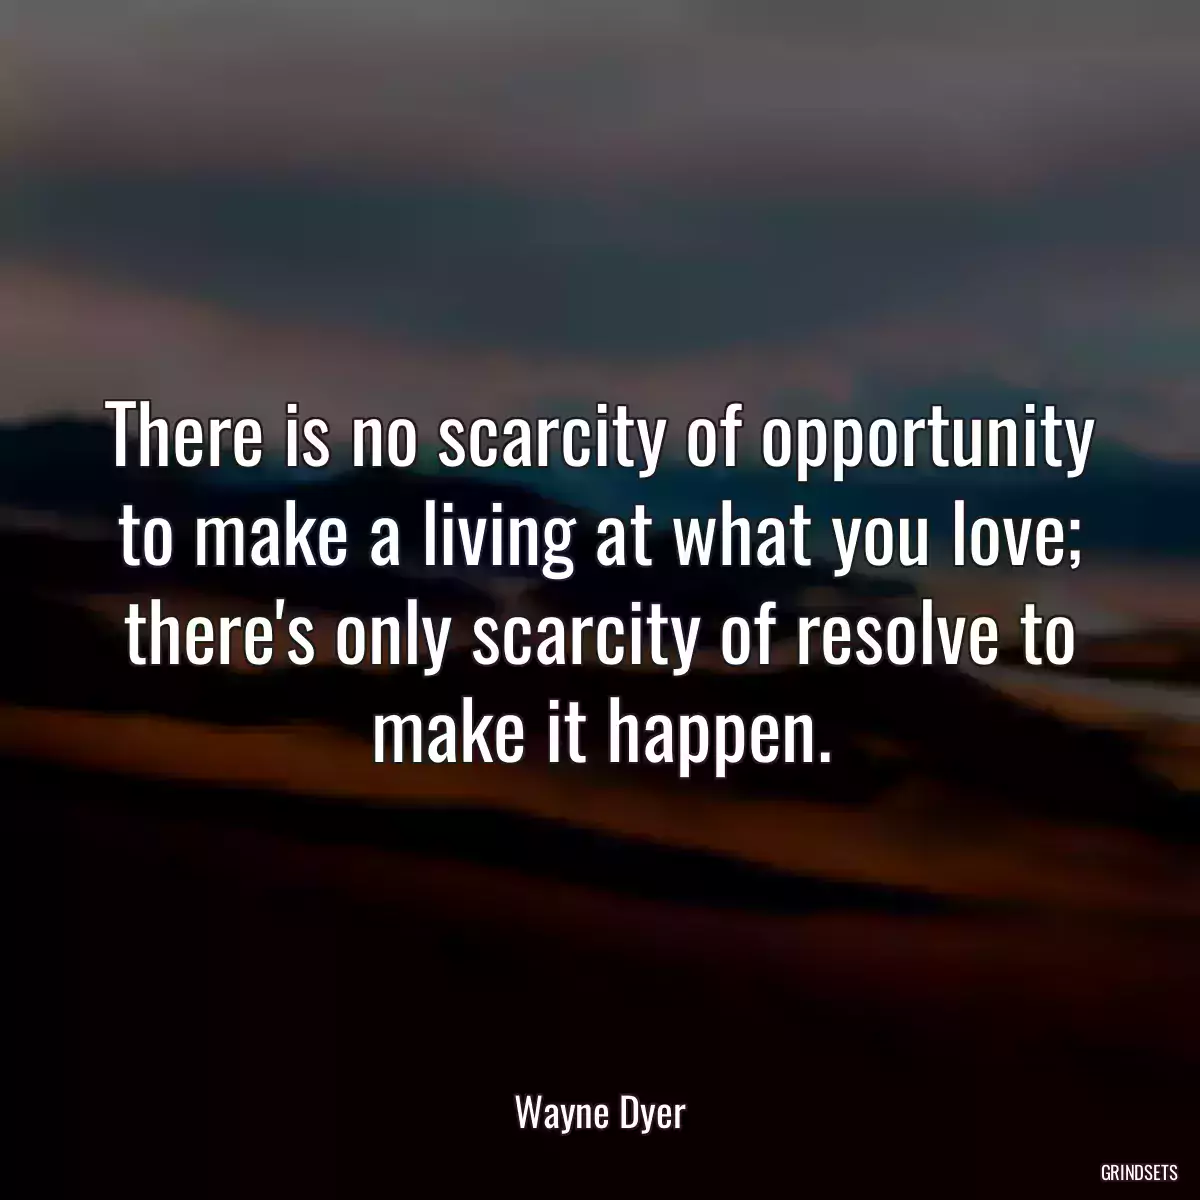 There is no scarcity of opportunity to make a living at what you love; there\'s only scarcity of resolve to make it happen.